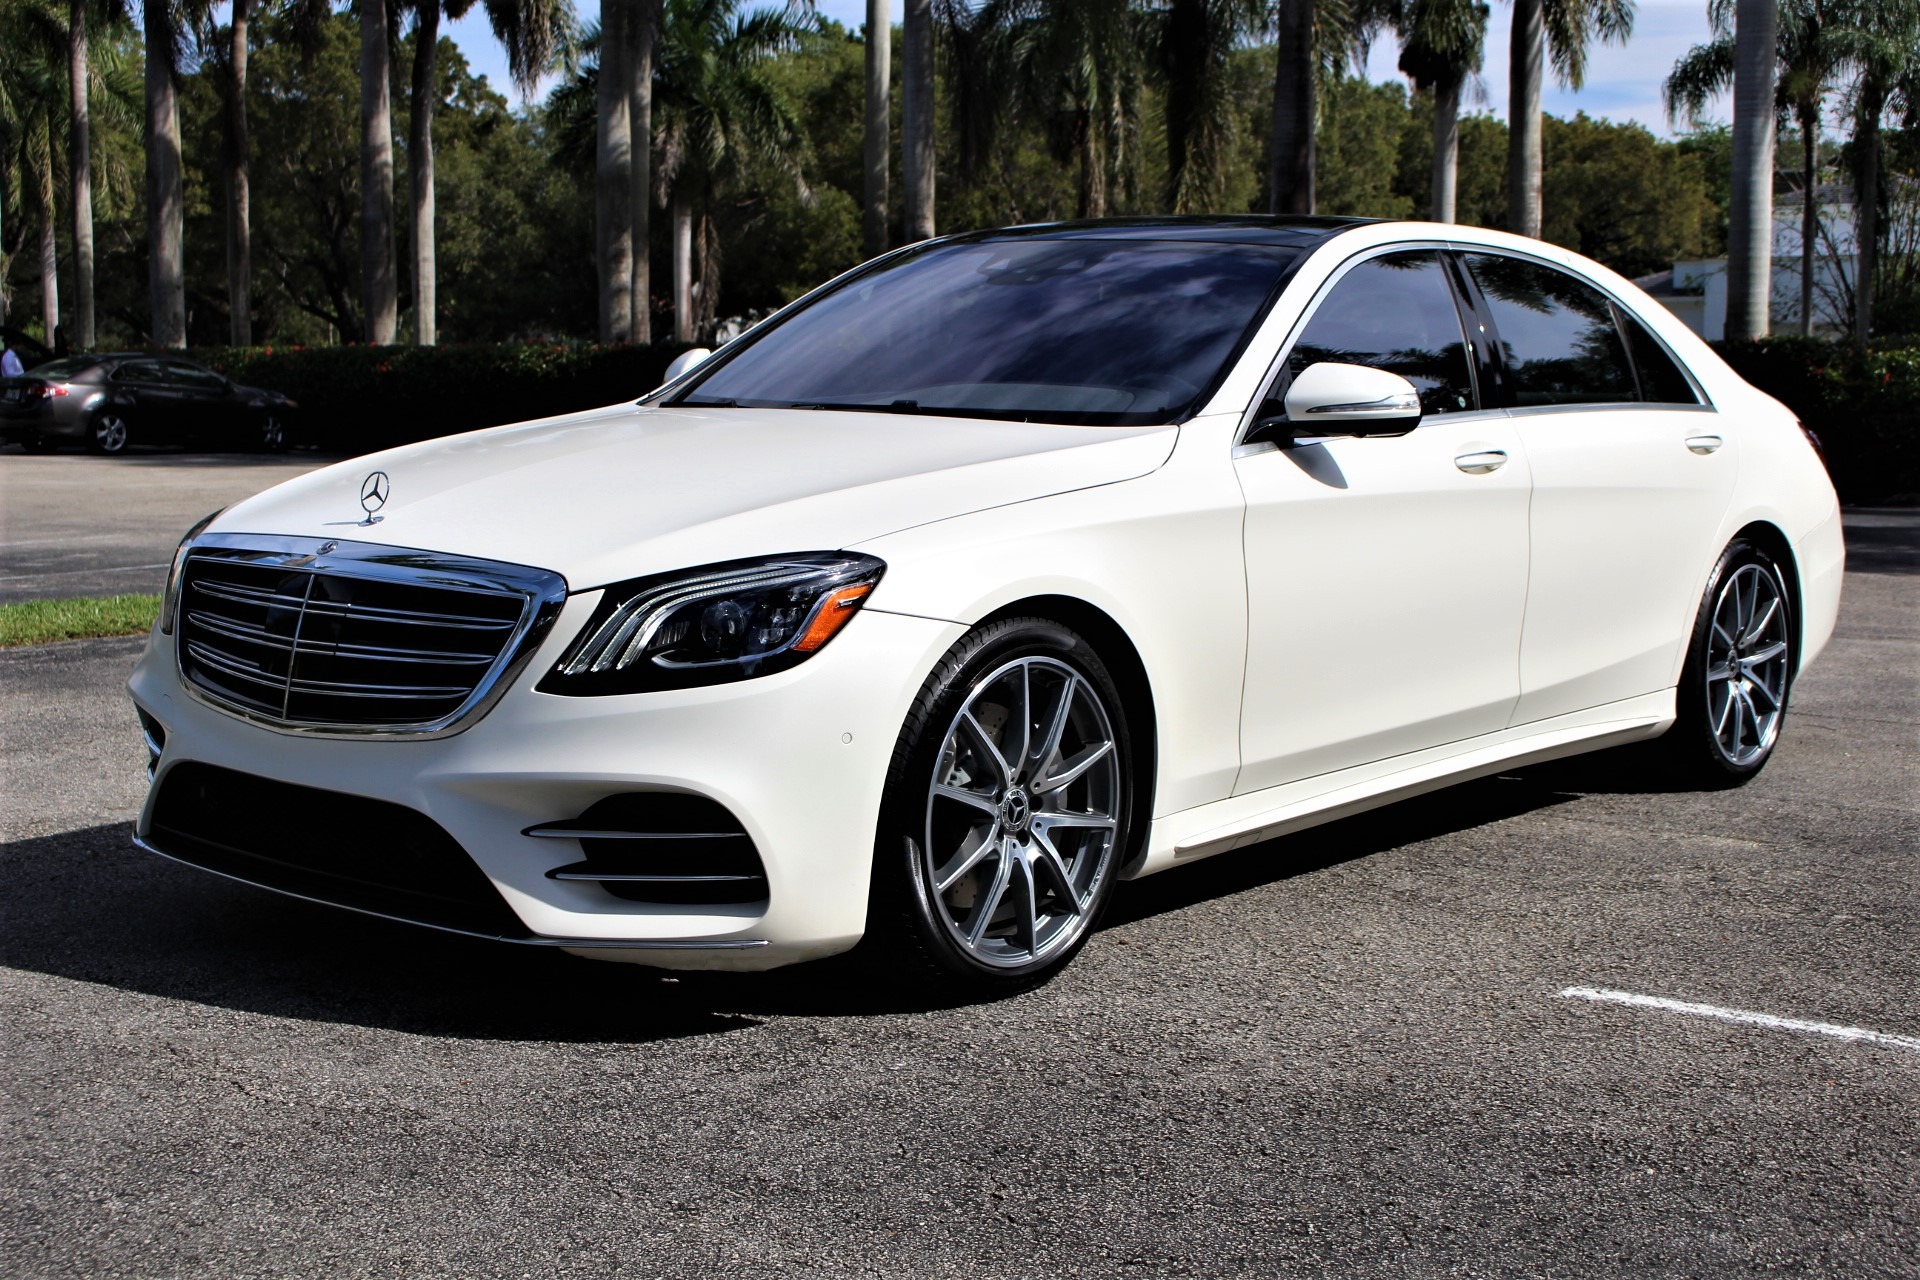 Used 2019 Mercedes-Benz S-Class S 560 for sale Sold at The Gables Sports Cars in Miami FL 33146 1